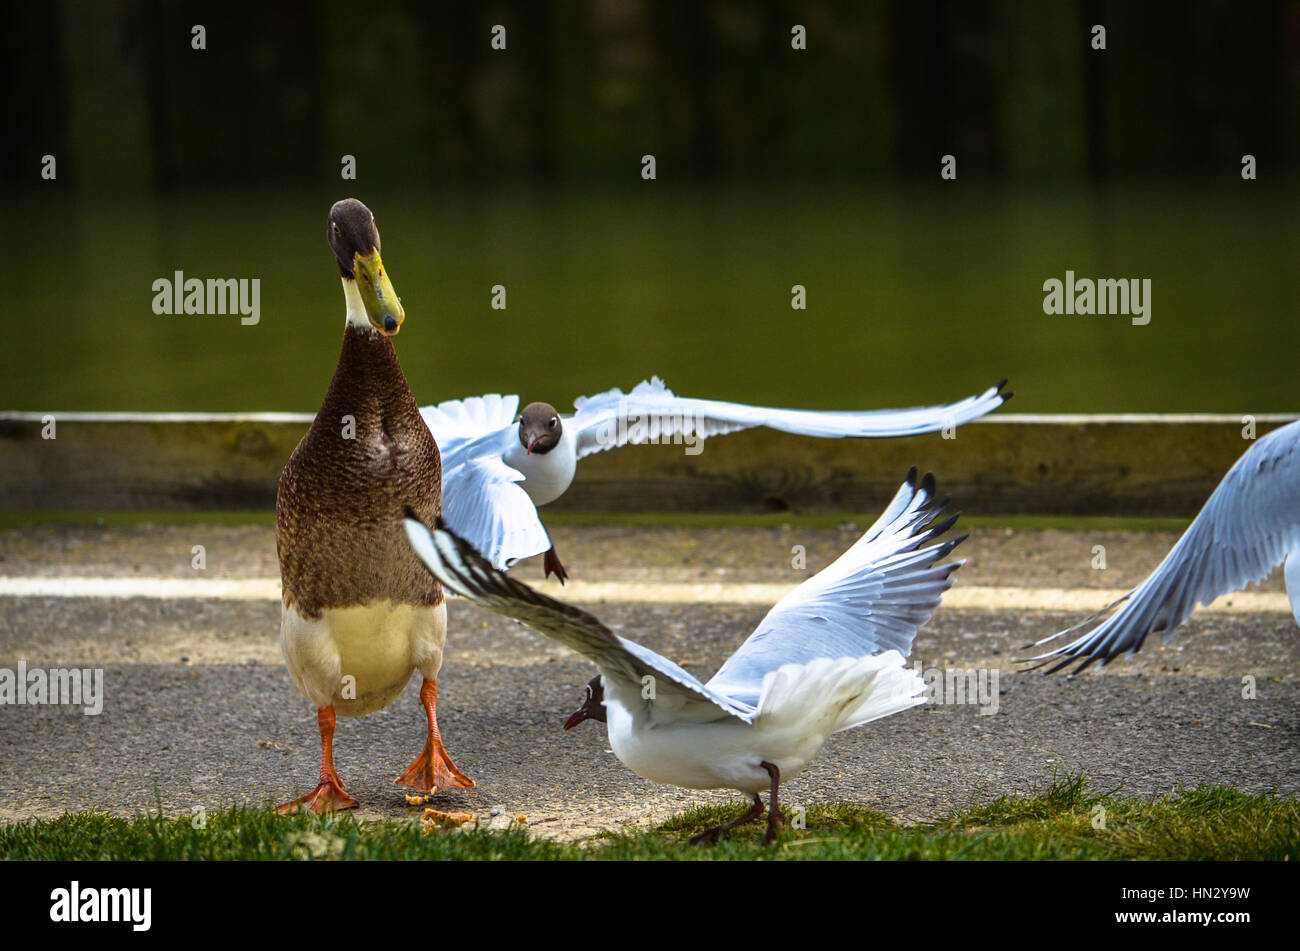 Curious duck walking among active seagulls by a path in Hyde Park Stock Photo